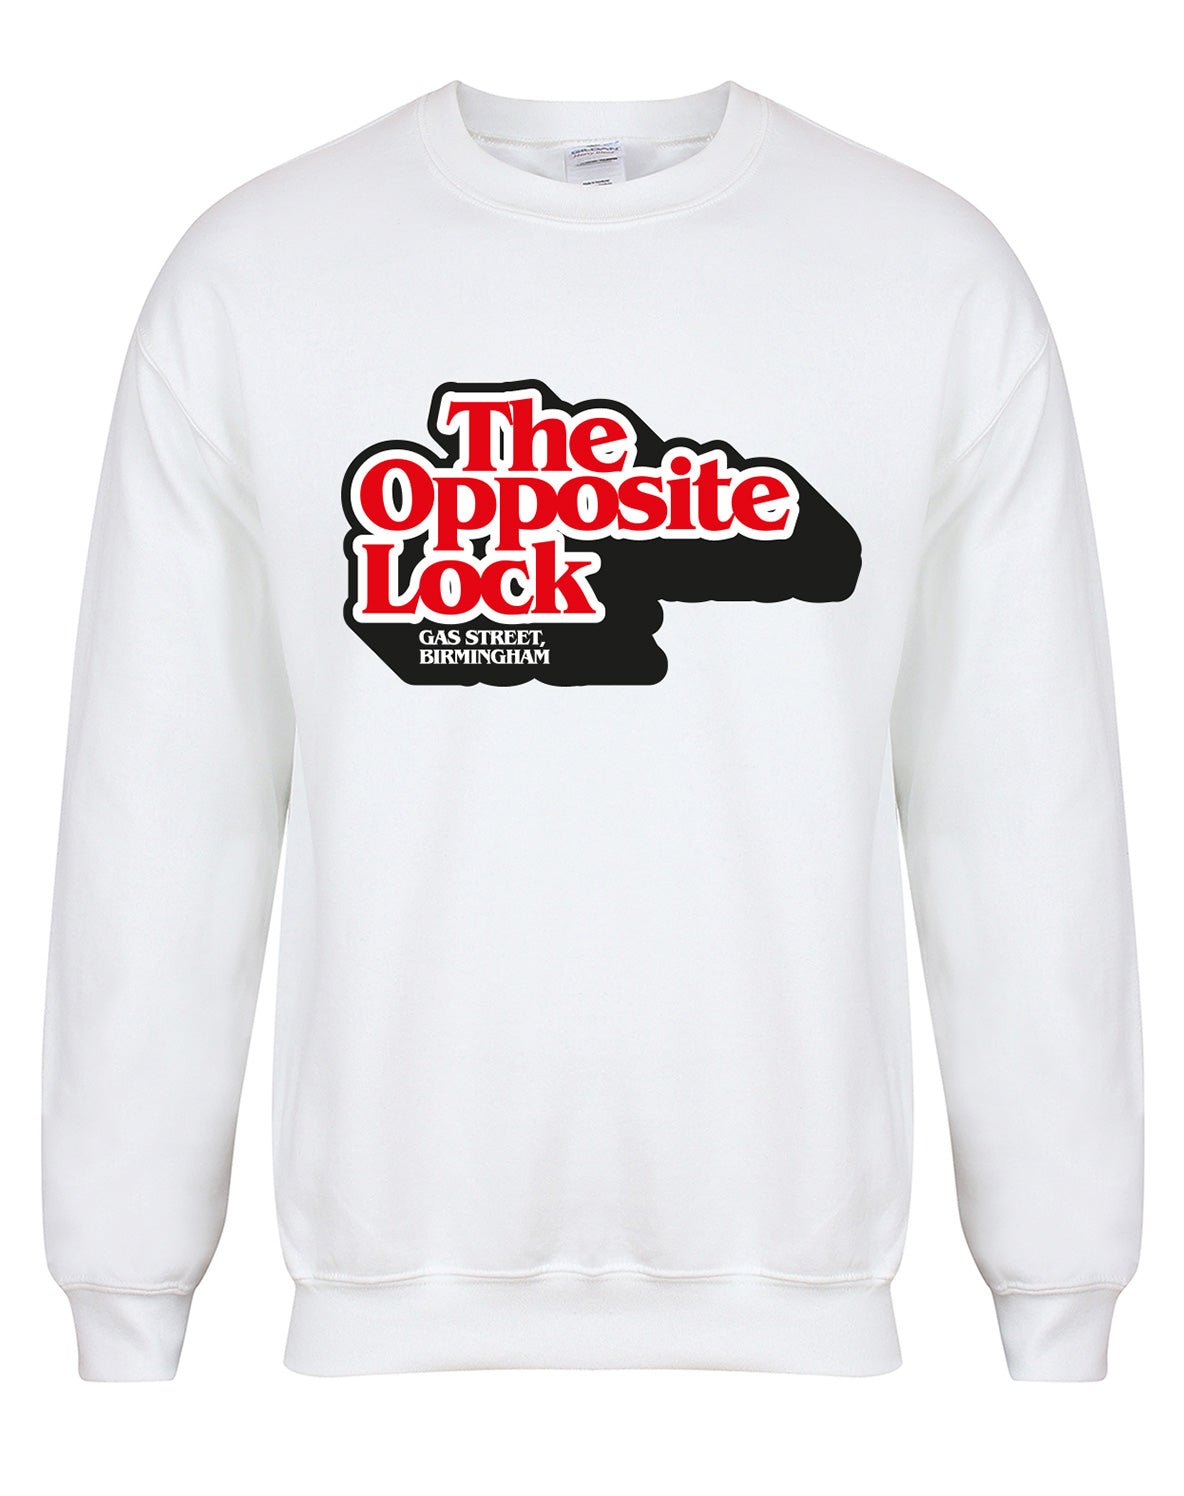 The Opposite Lock unisex fit sweatshirt - various colours - Dirty Stop Outs